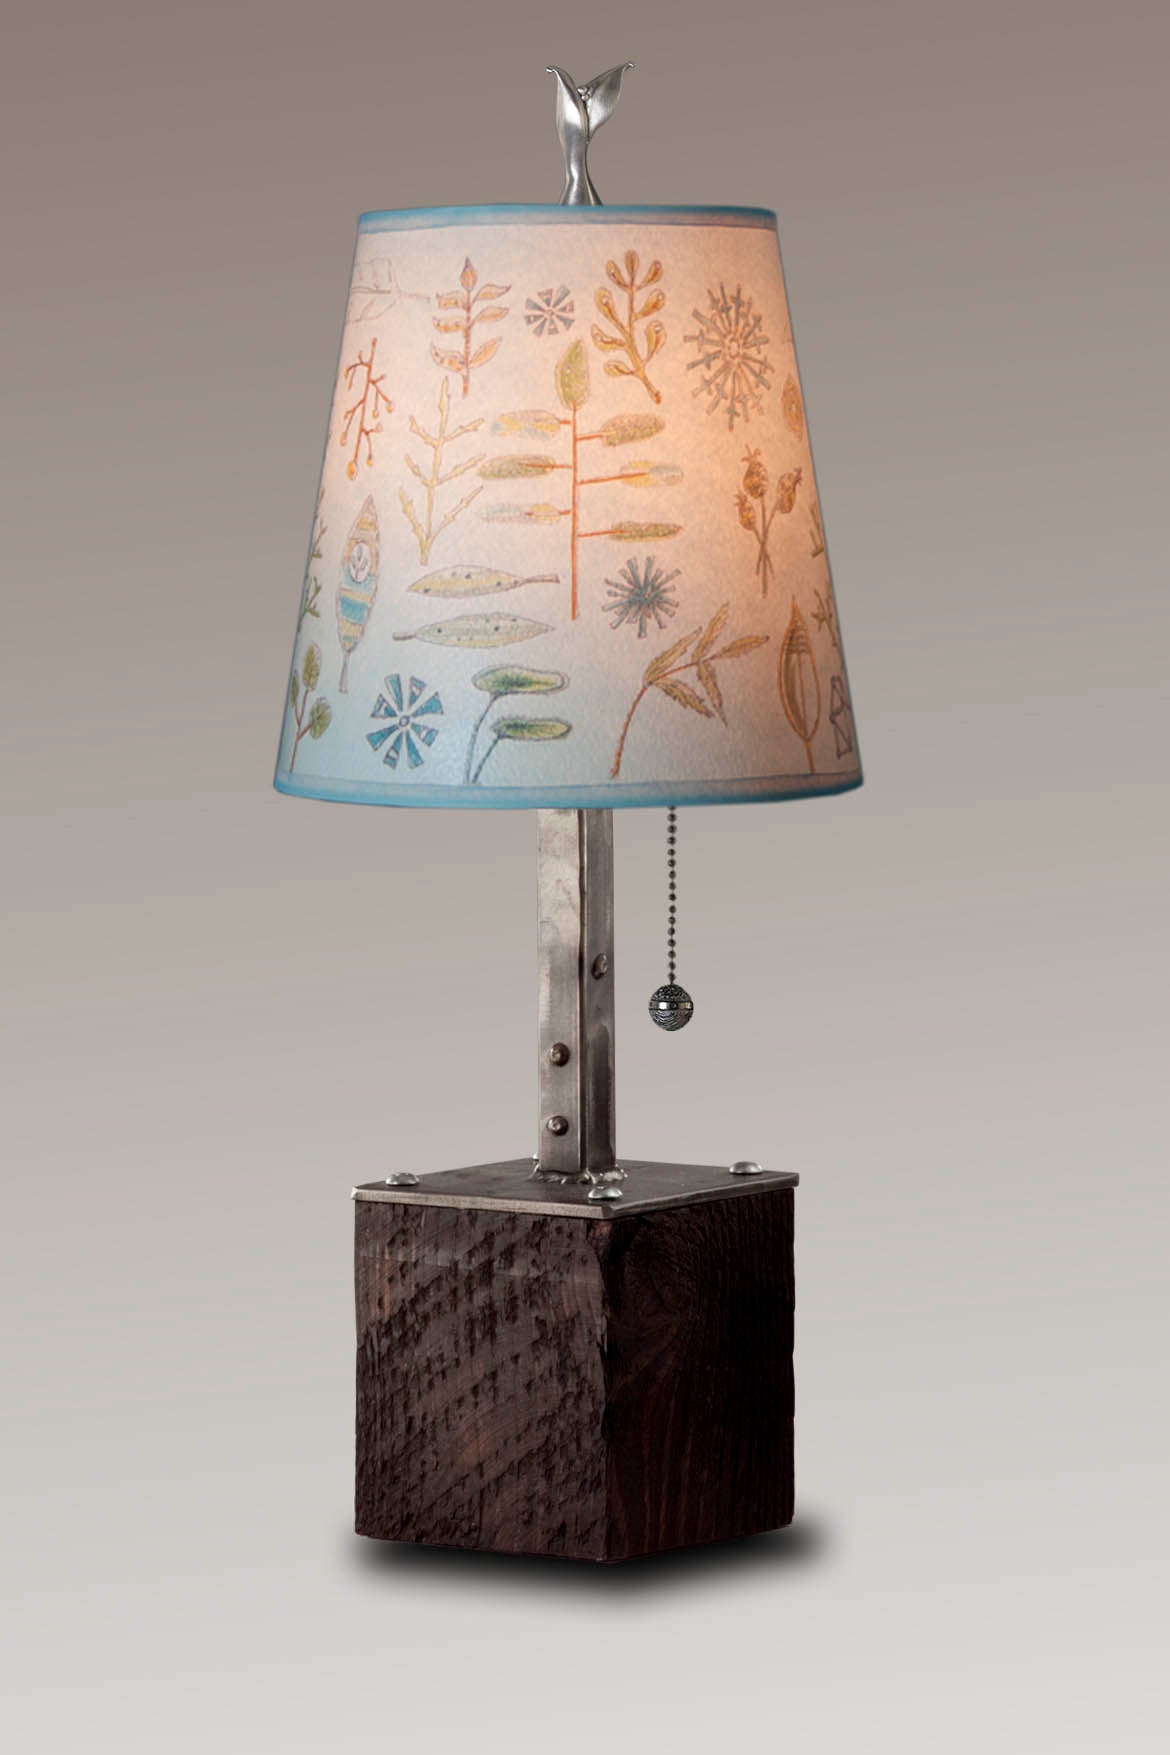 Janna Ugone &amp; Co Table Lamp Steel Table Lamp on Reclaimed Wood with Small Drum Shade in Field Chart